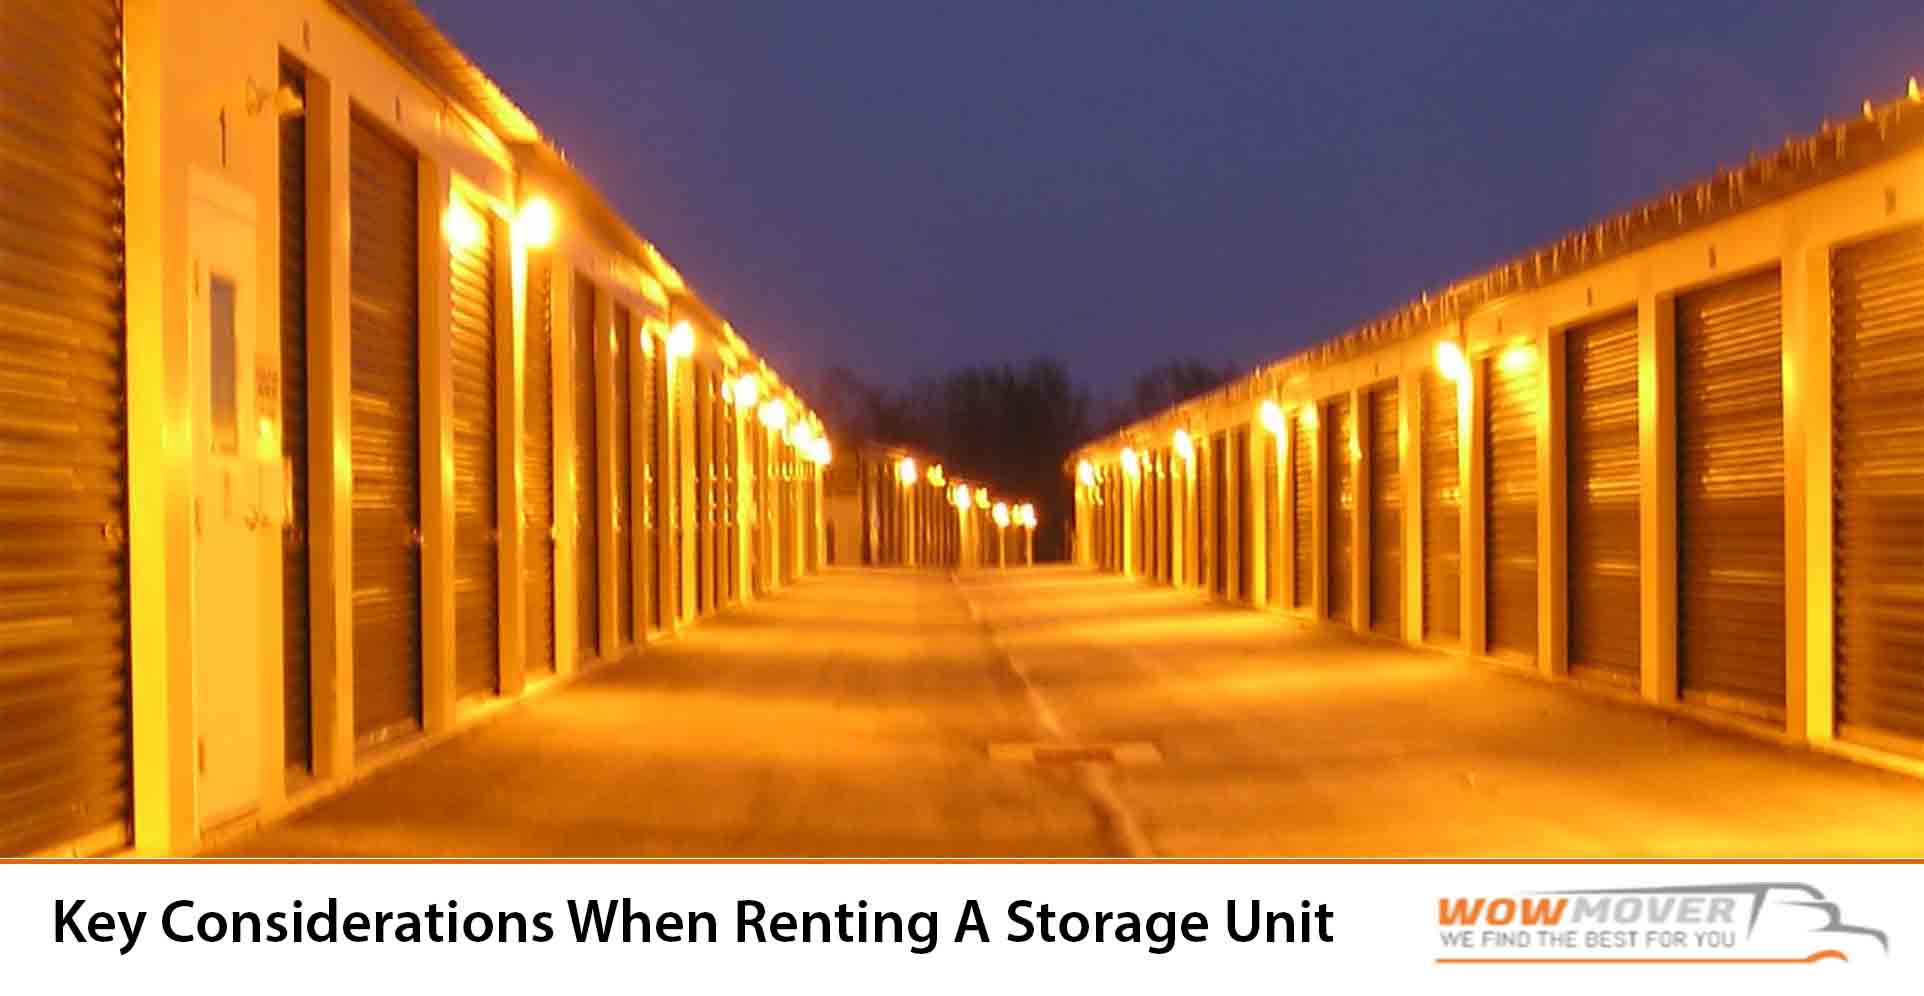 Key Considerations When Renting A Storage Unit